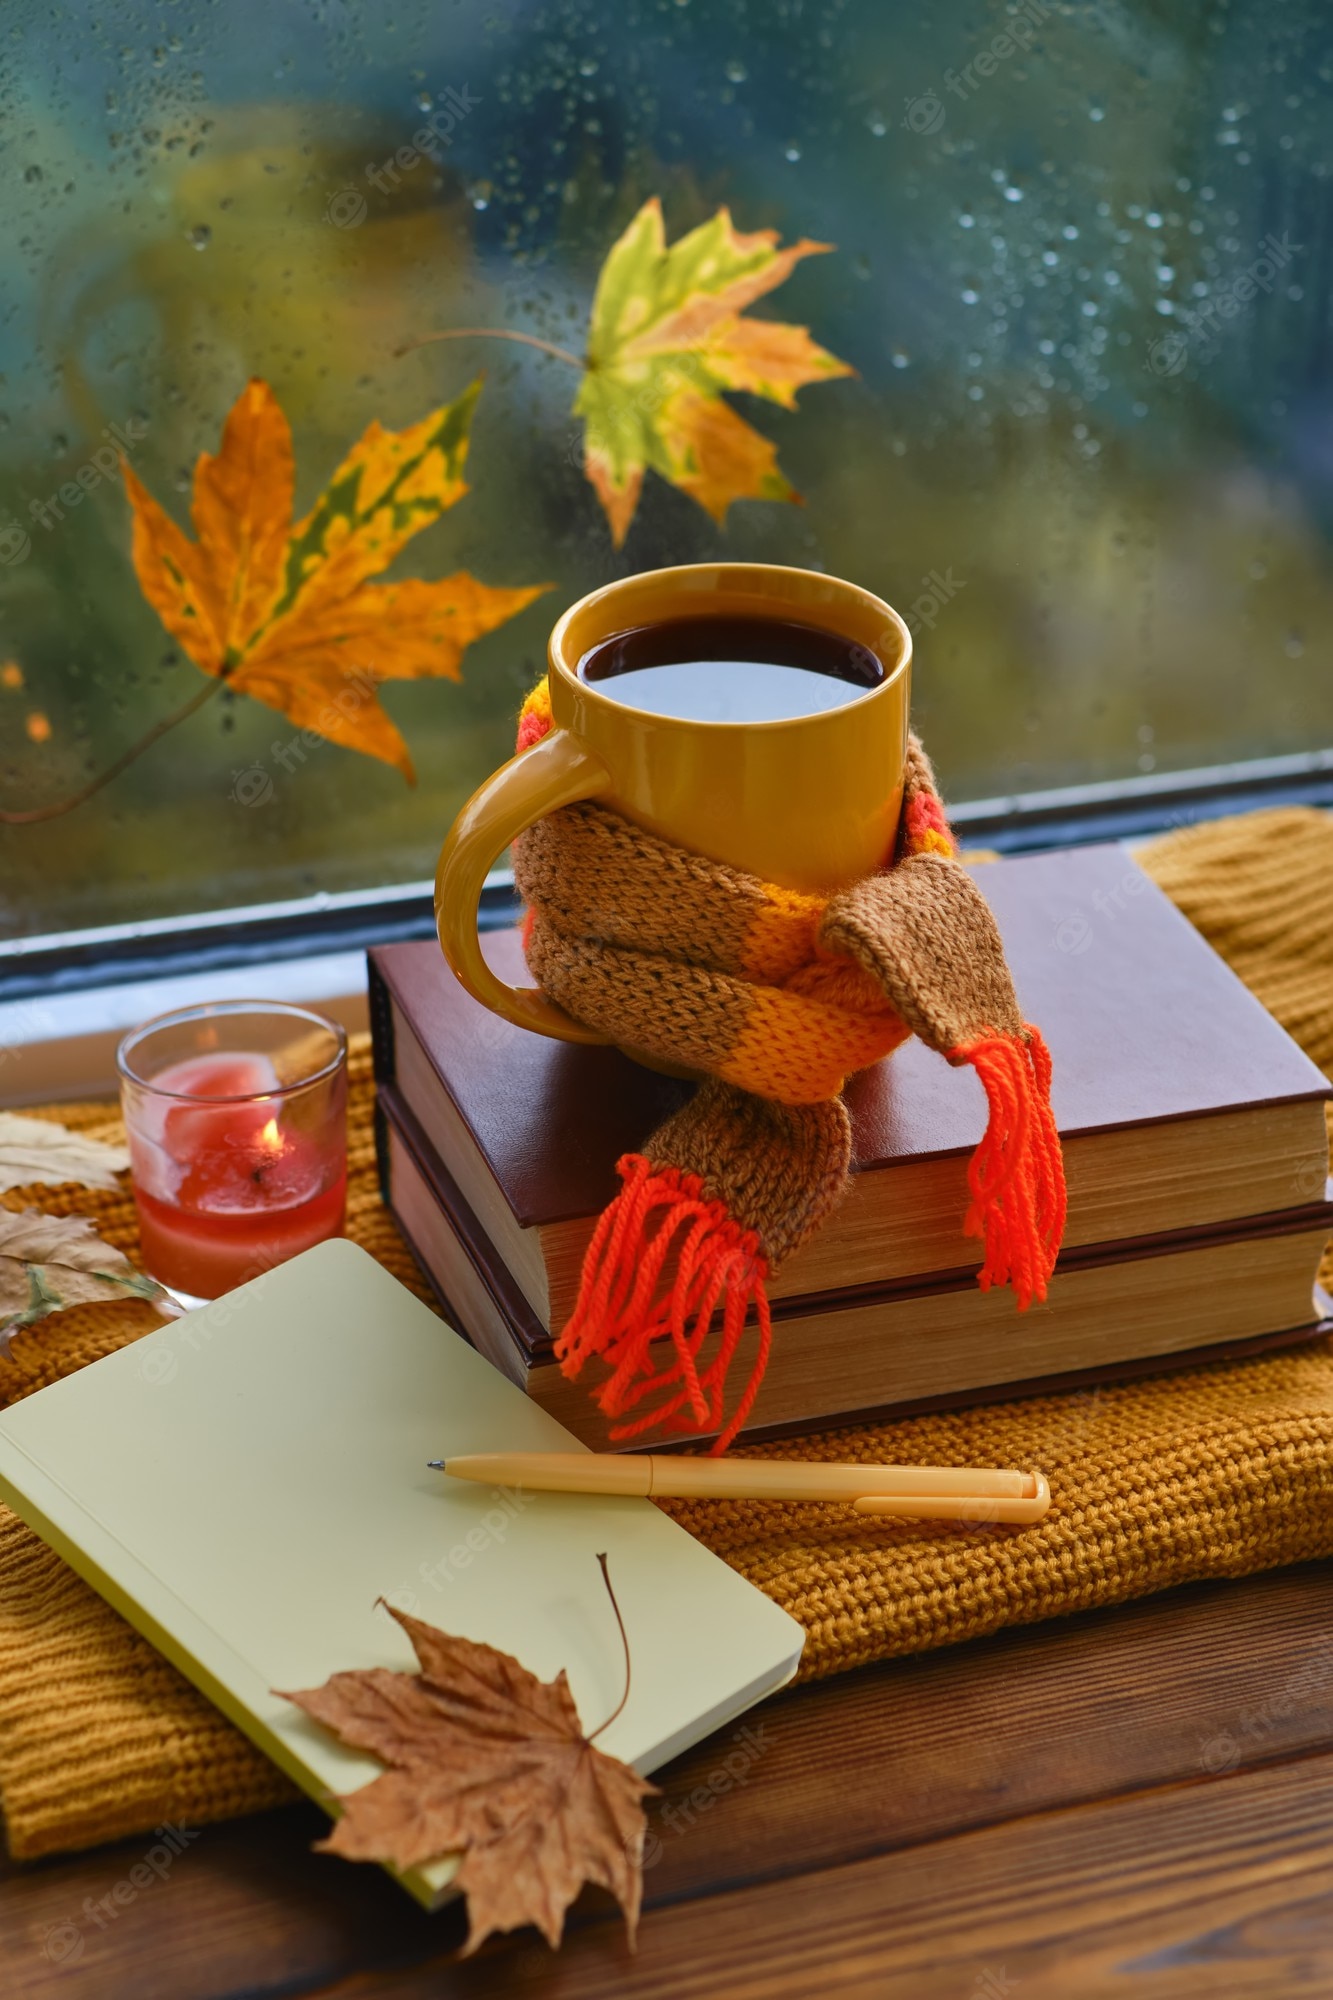 Premium Photo. Creative mood. cup of tea, autumn leaves, books, notebook and red knitted plaid on wooden table. cozy autumn composition with mock up notebook. fall. hello autumn